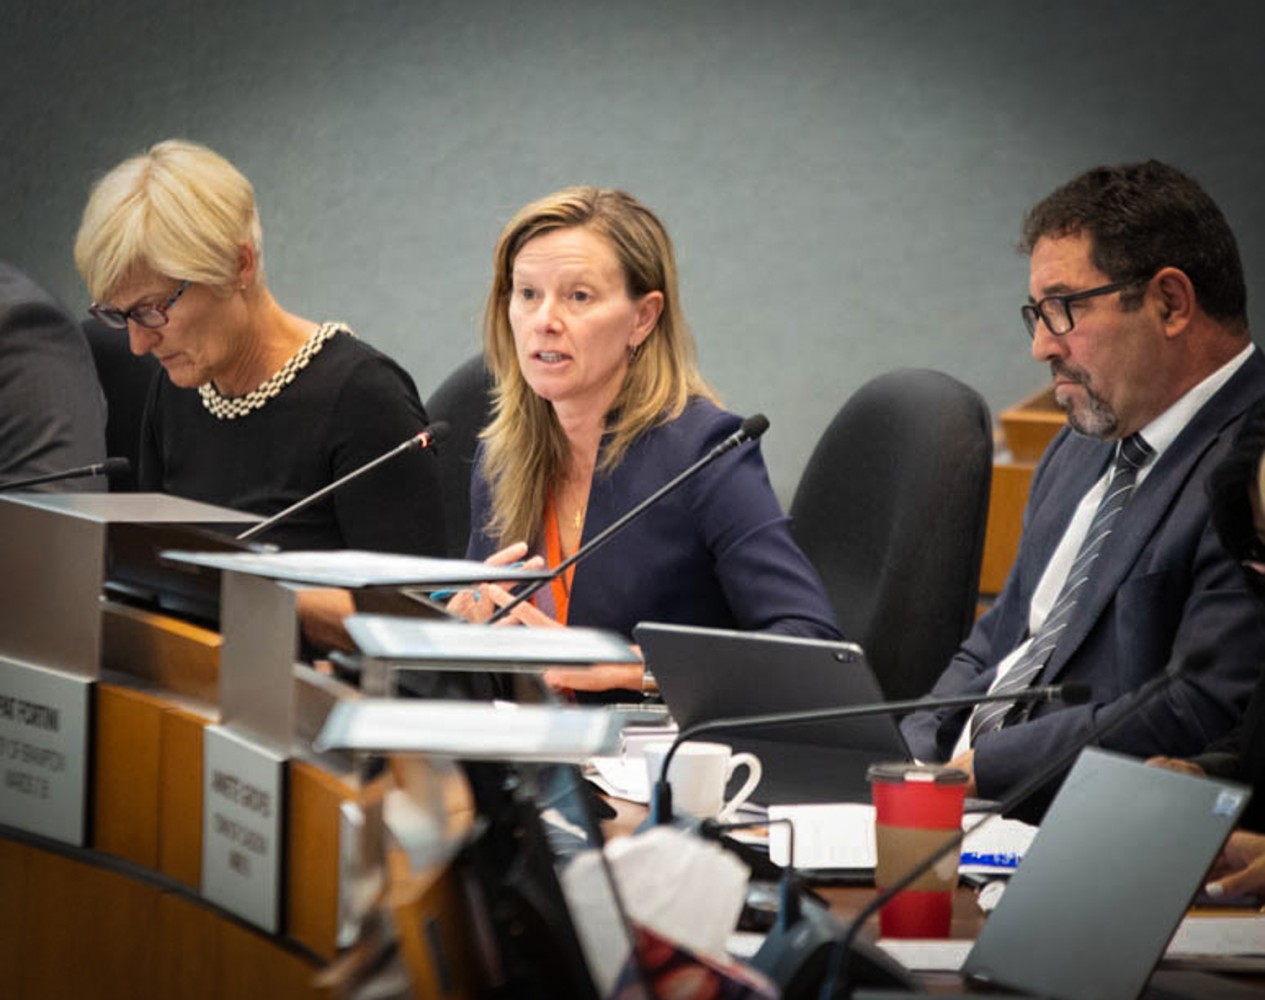 Peel councillor pushes for united voice on stopping rise in gender-based violence